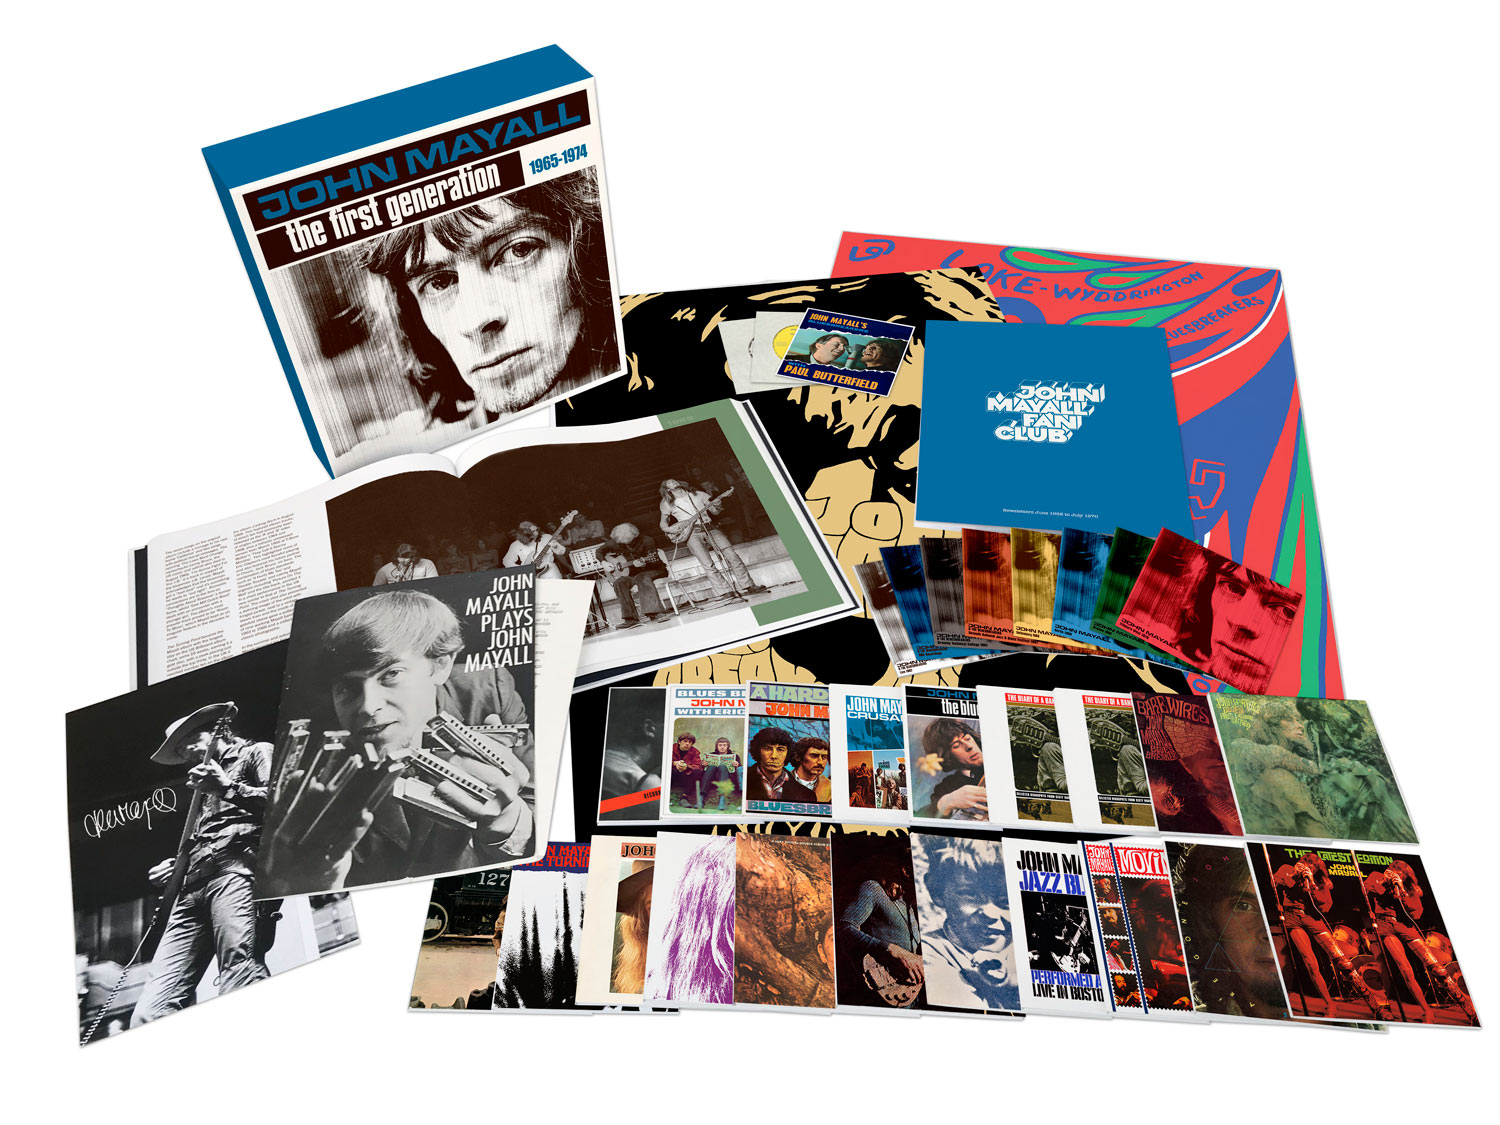 John Mayall / The First Generation 1965-1974 deluxe box set –  SuperDeluxeEdition